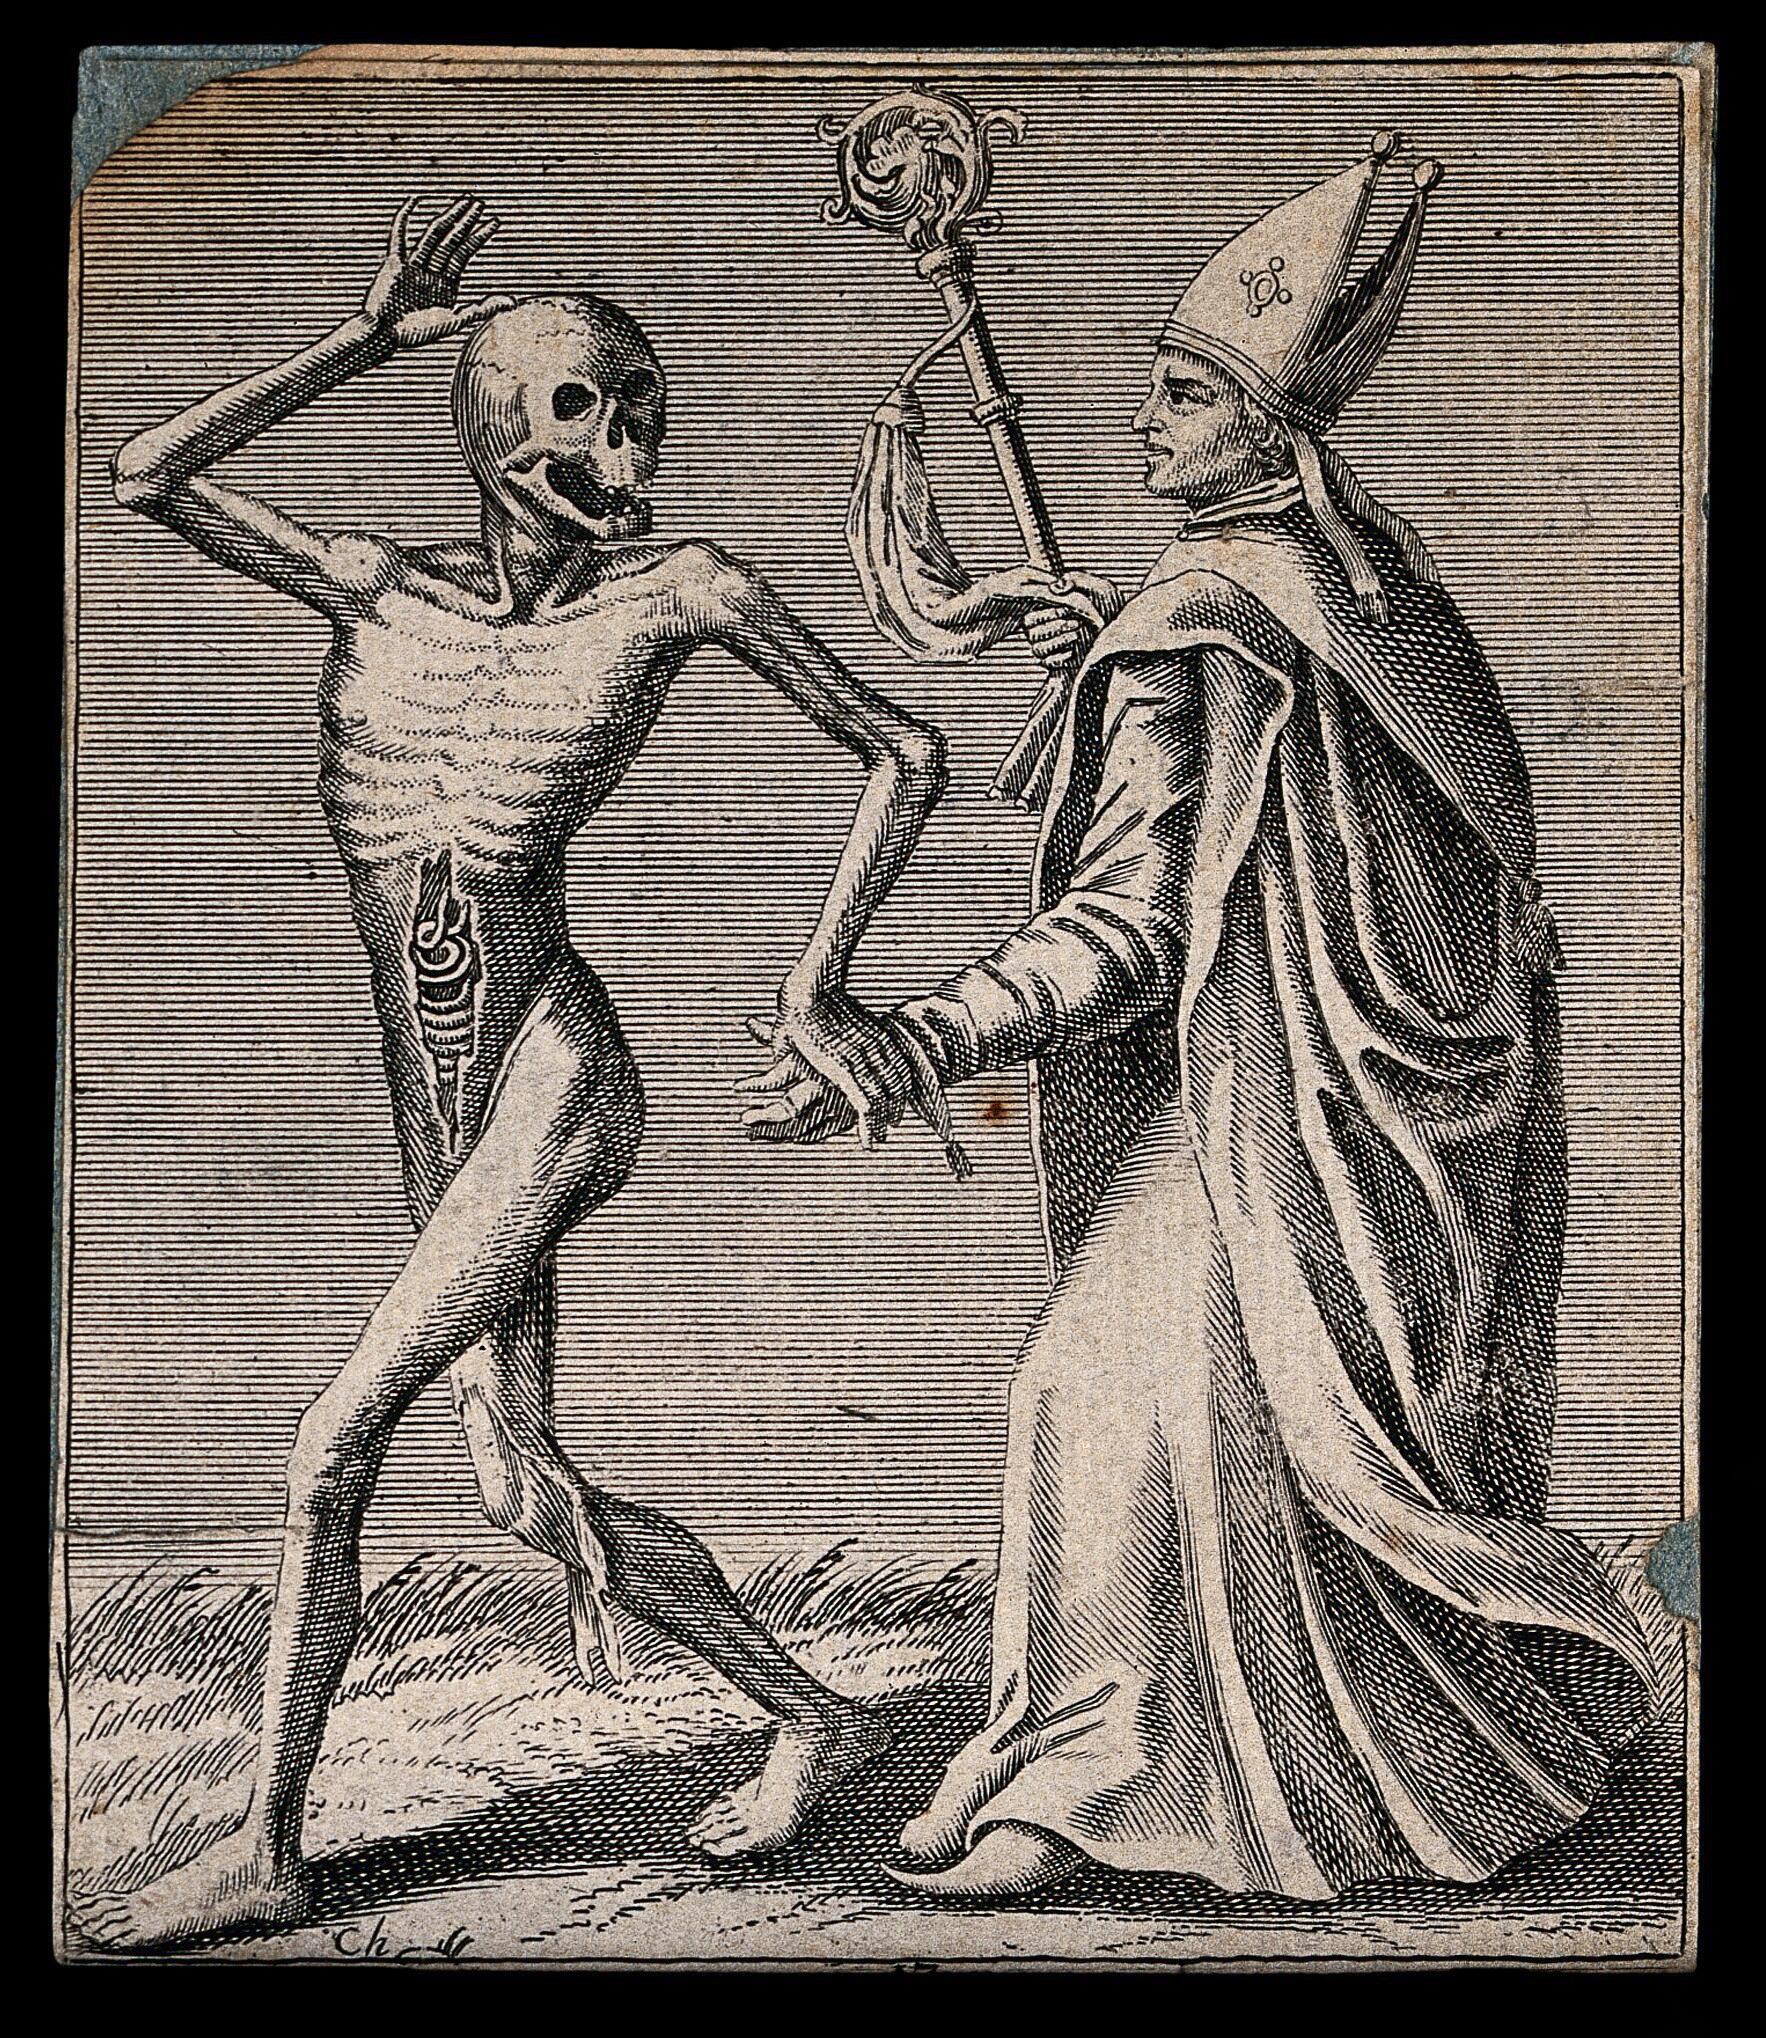 Everyone from the poor to the powerful will eventually dance with death. Dance of death: death and the bishop. Etching attributed to J.-A. Chovin, 1720-1776, after the Basel dance of death. Wellcome Collection., CC BY